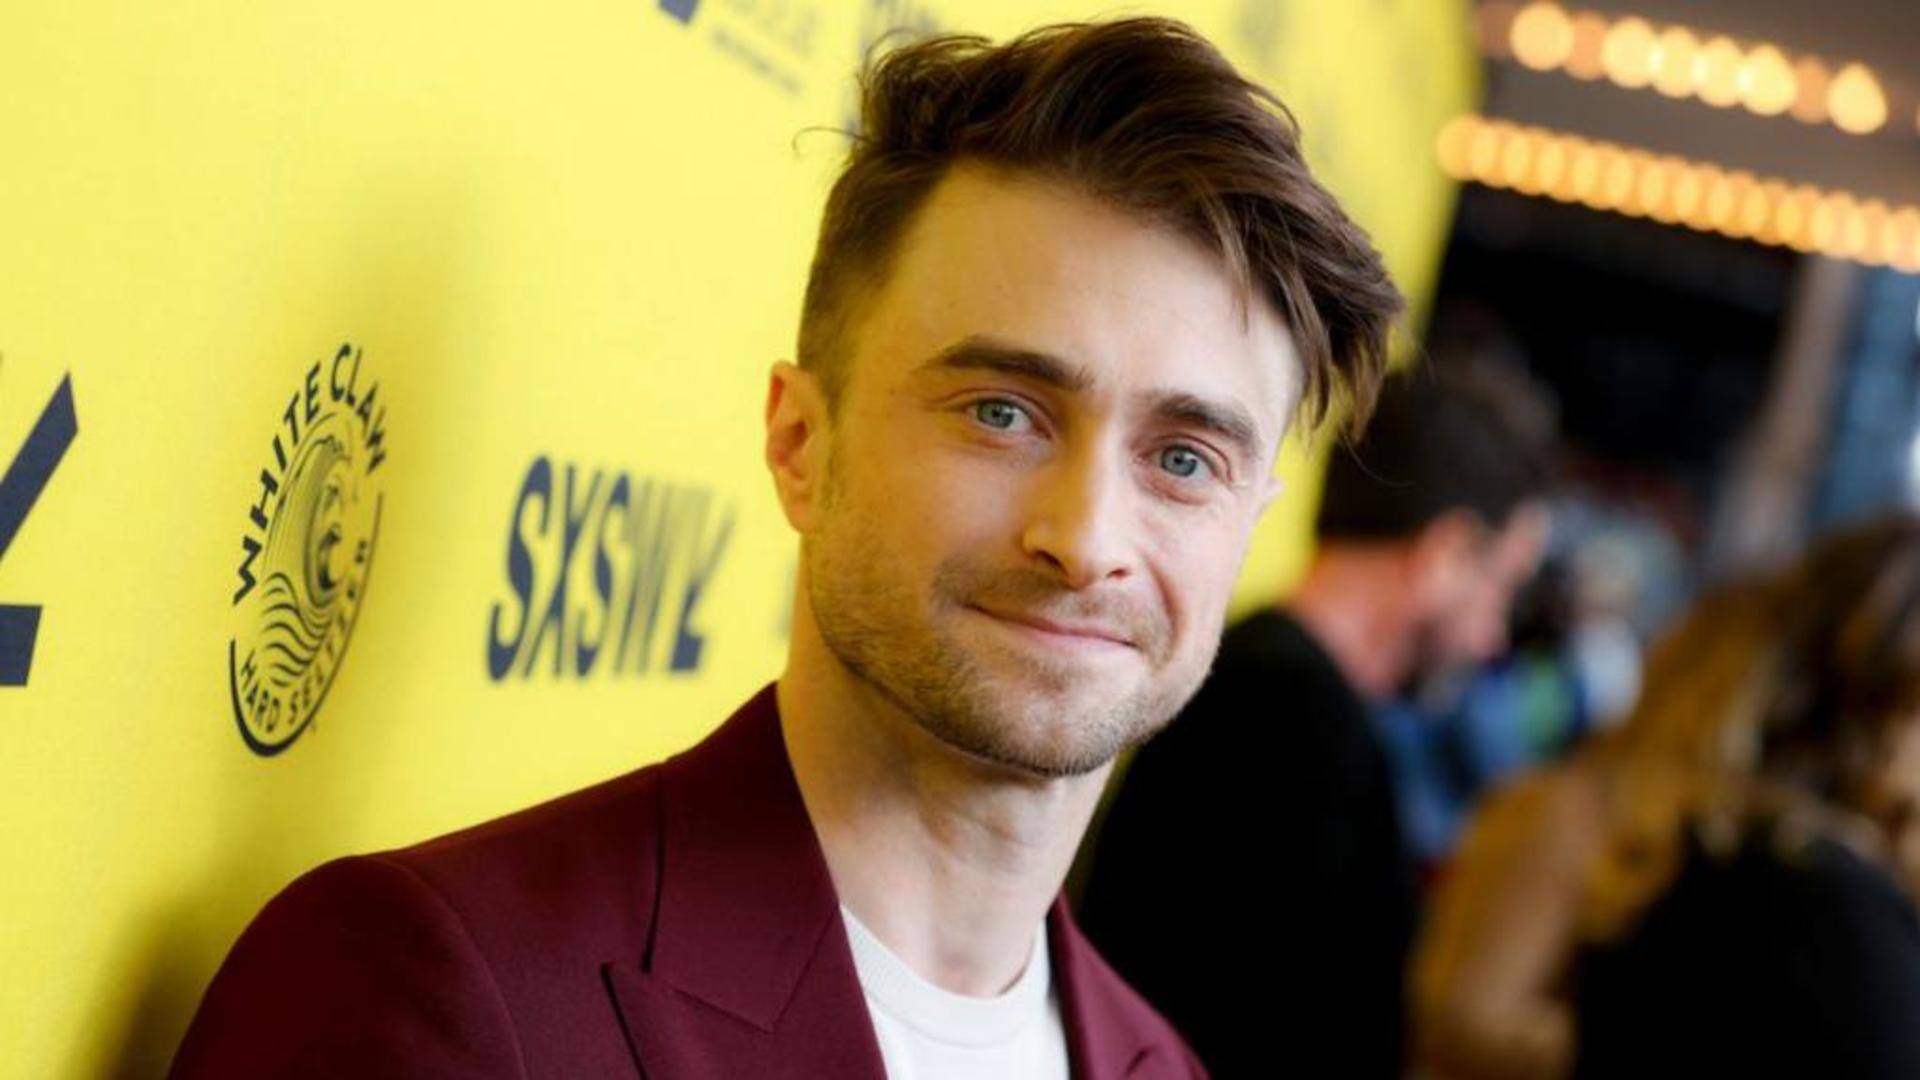 Will we see Daniel Radcliffe in upcoming 'Harry Potter' series